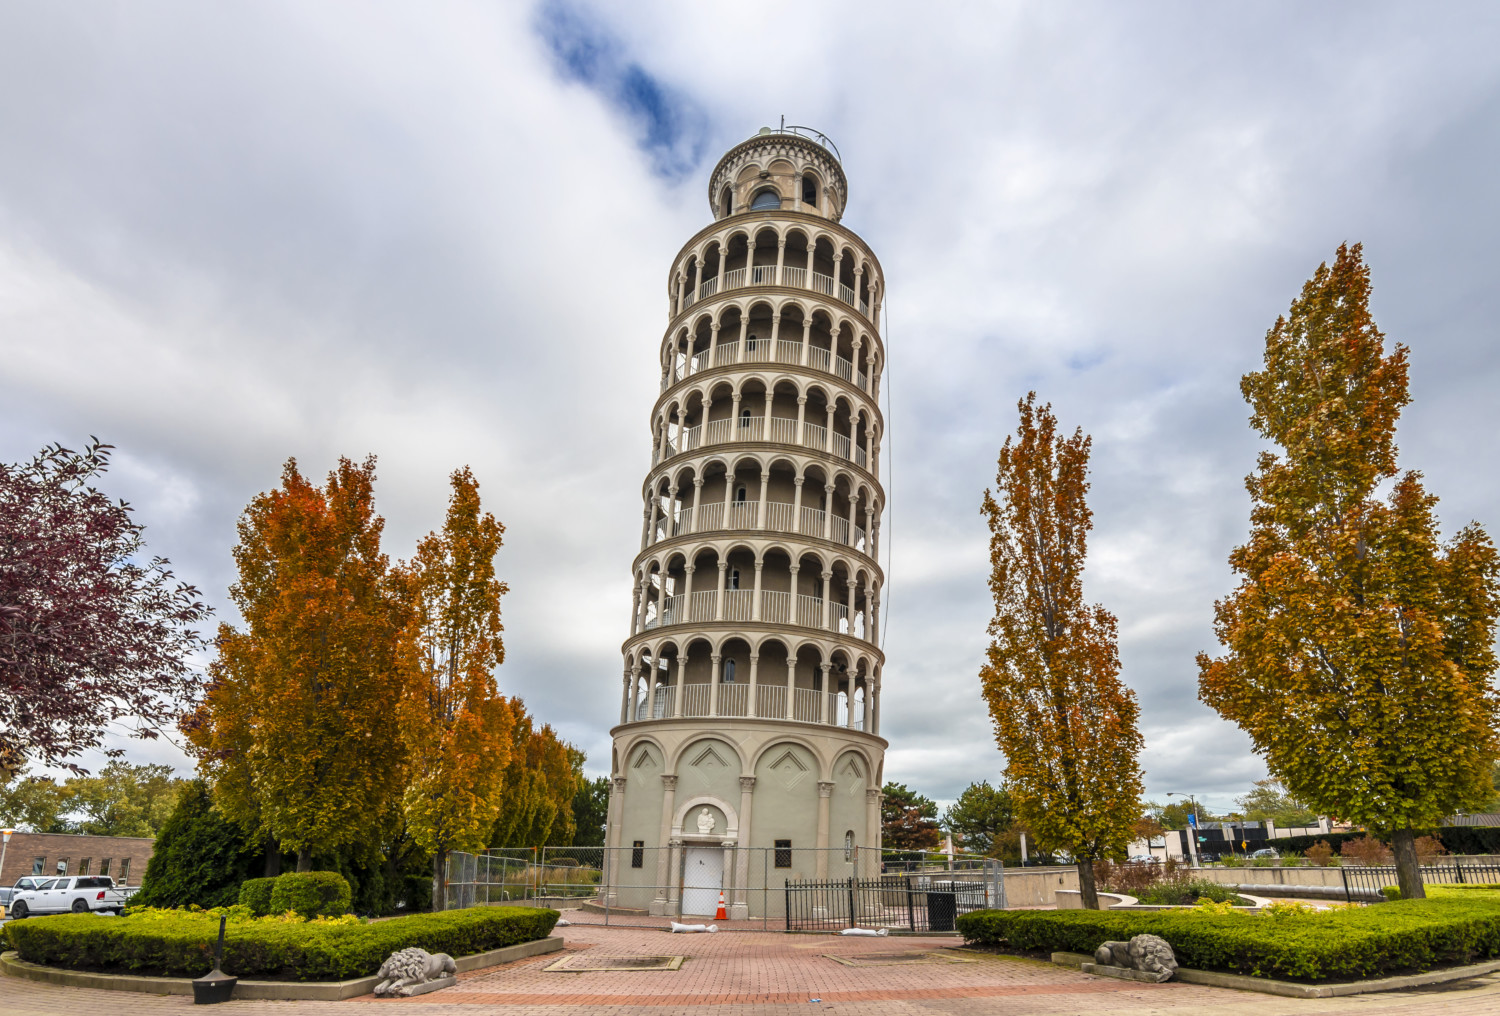 Leaning Tower of Niles in Niles, Illinois